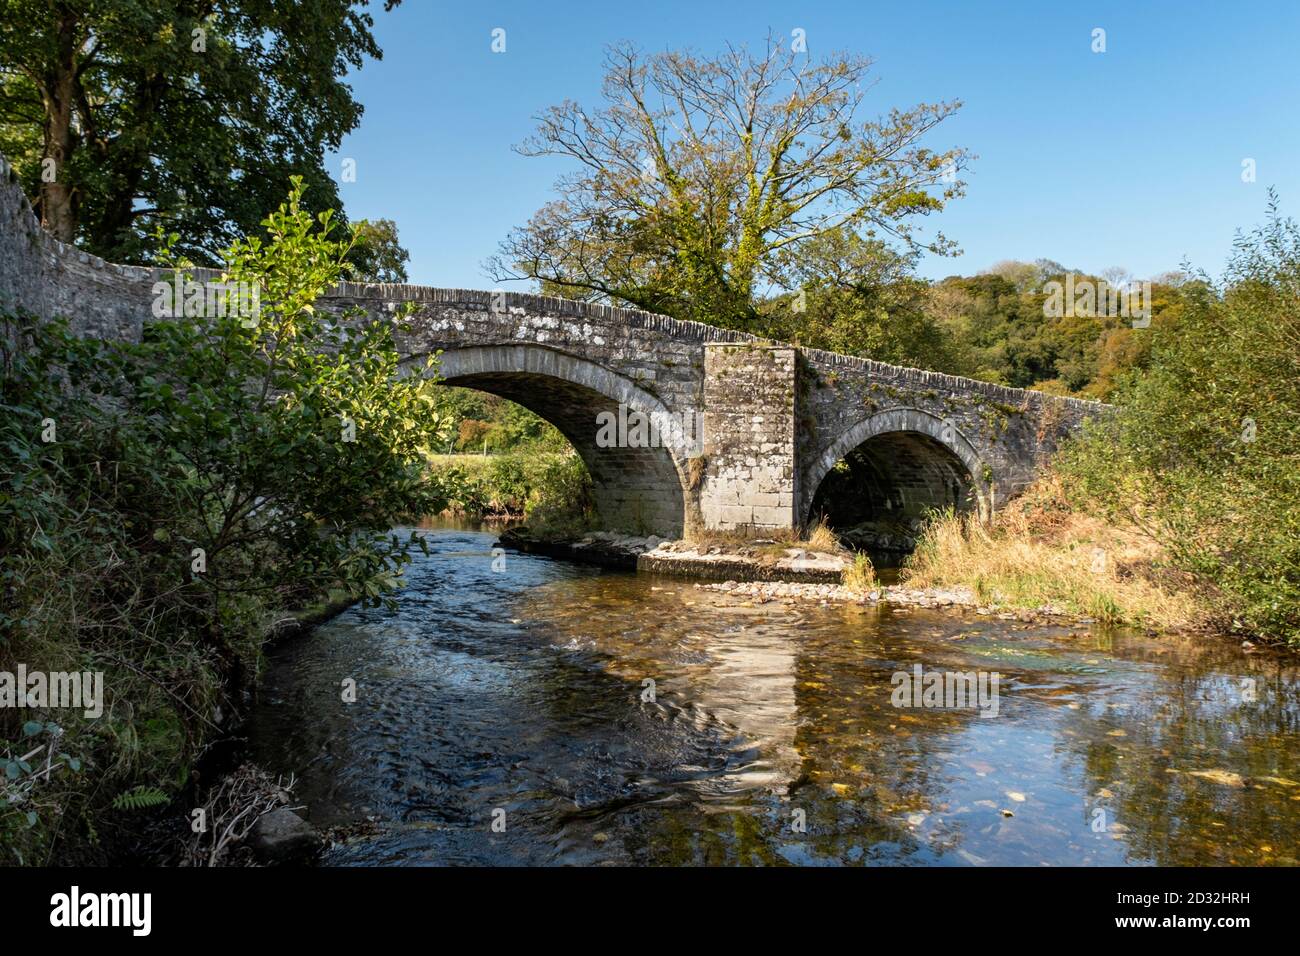 Nevern Bridge is a Grade II listed bridge that spans the River Nevern in the small village of Nevern, Pembrokeshire, Wales. Stock Photo